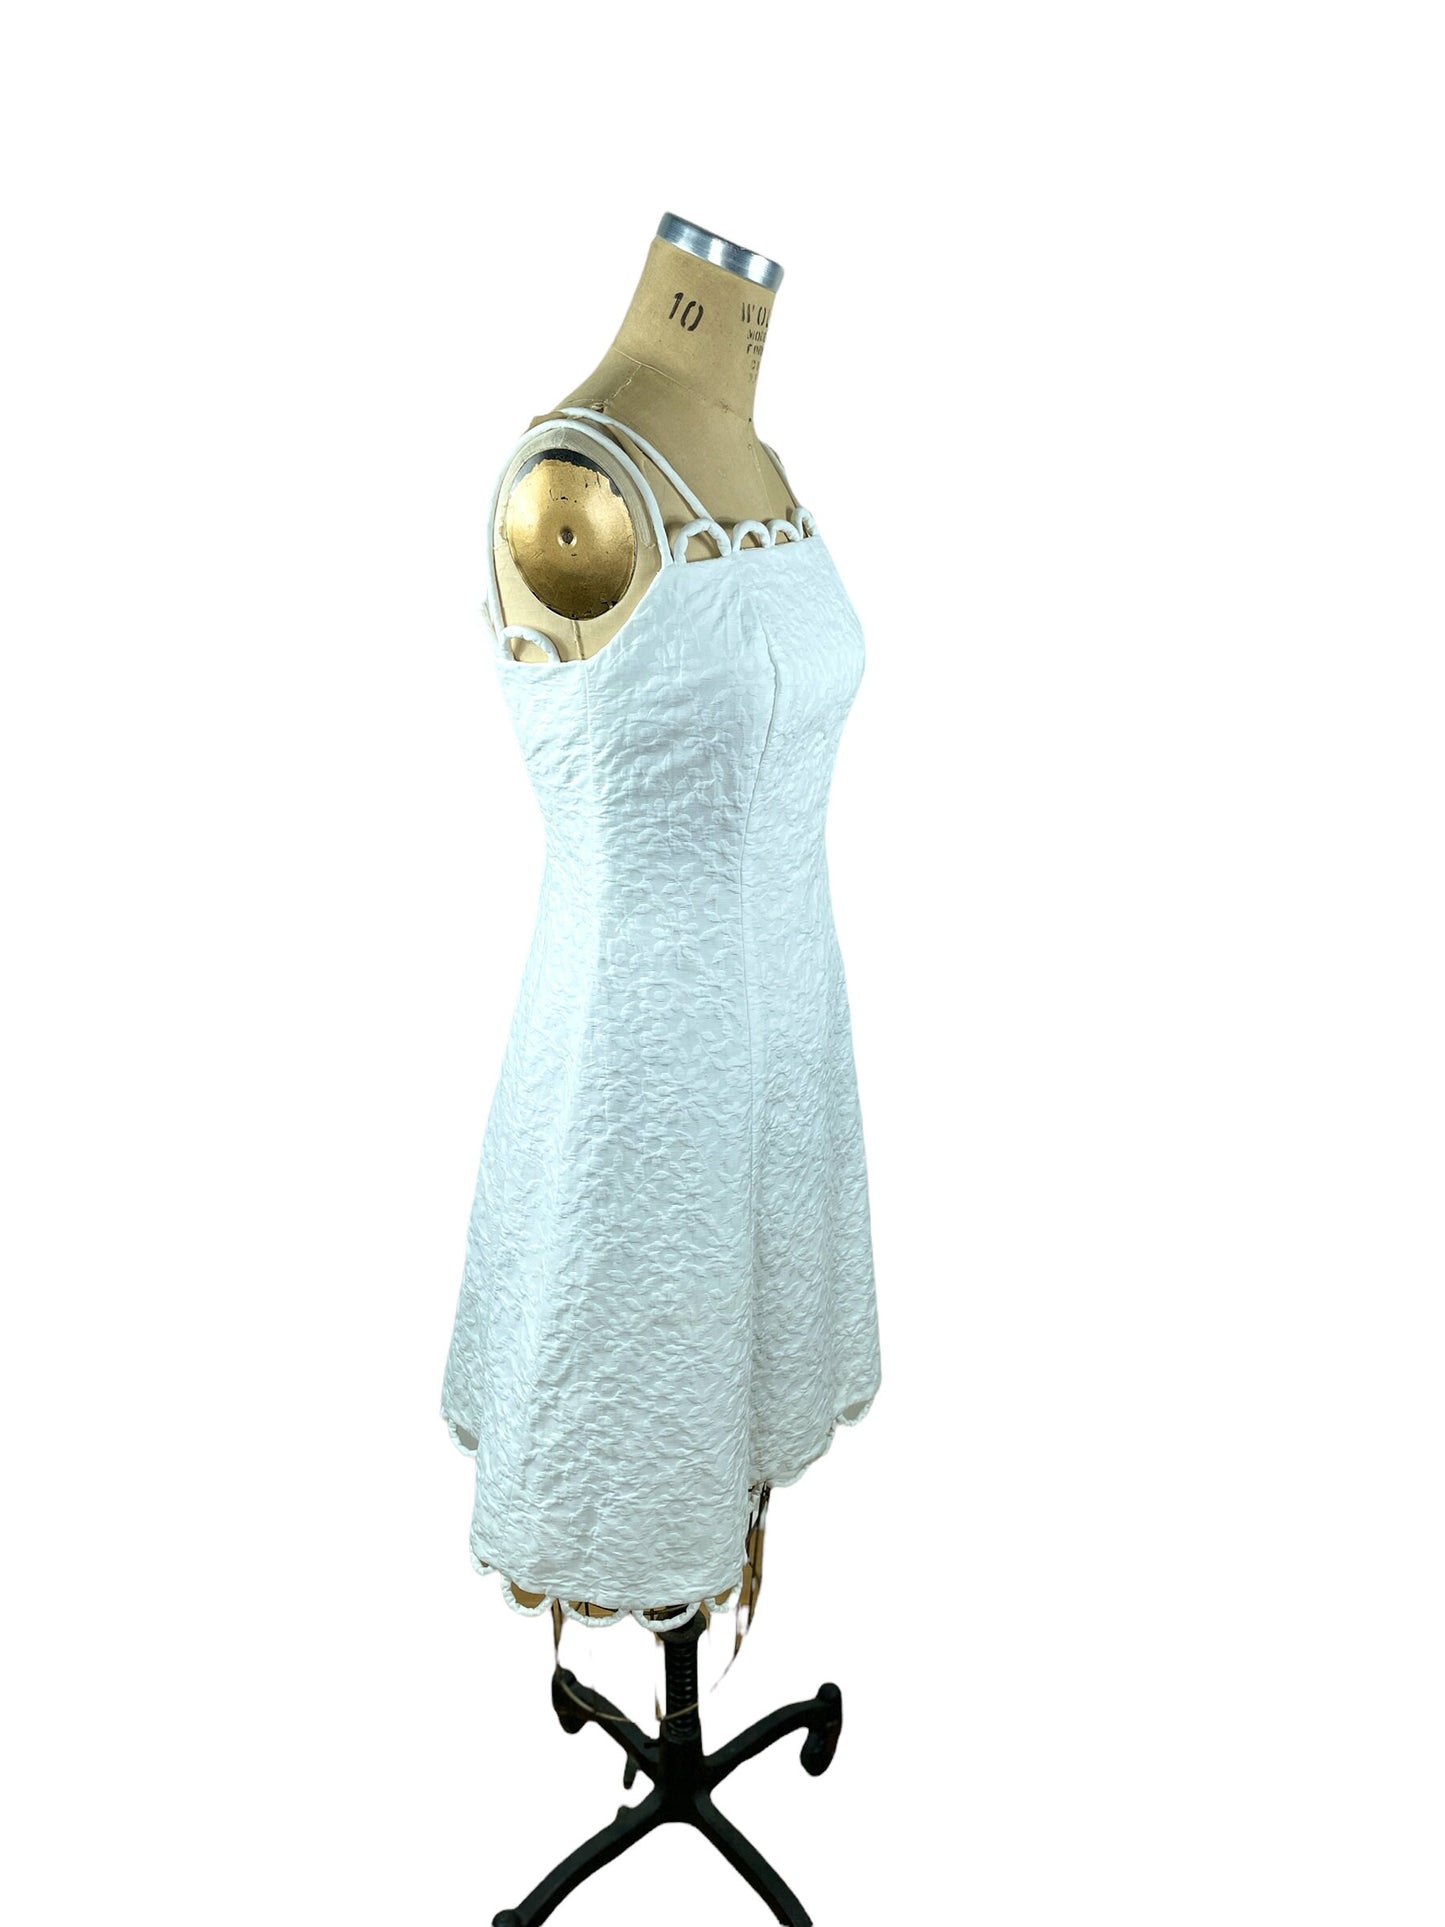 1970s white sundress with scalloped rope detailing and matelasse fabric by Neiman Marcus Size S/M